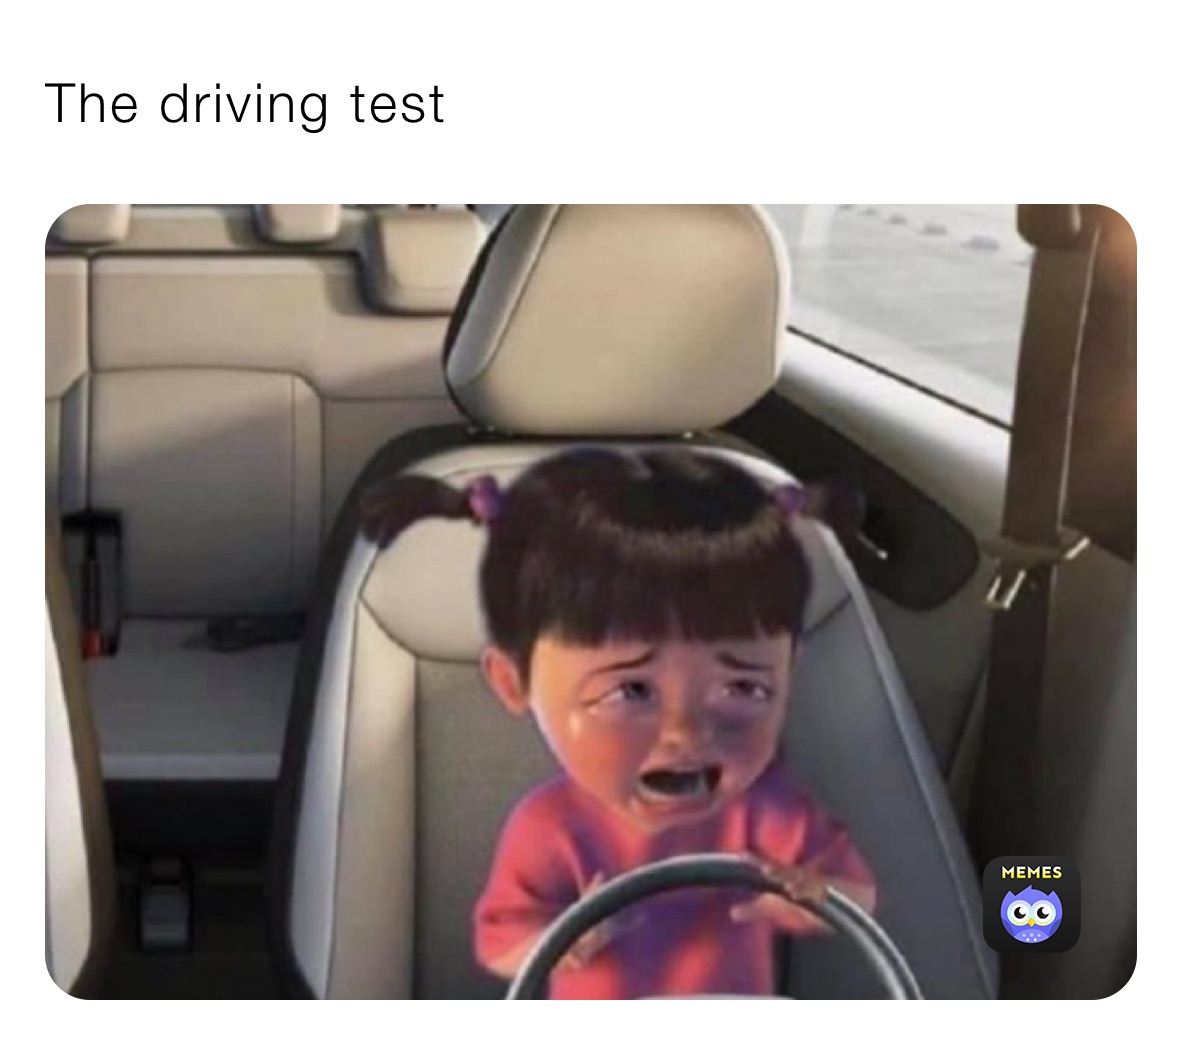 The driving test